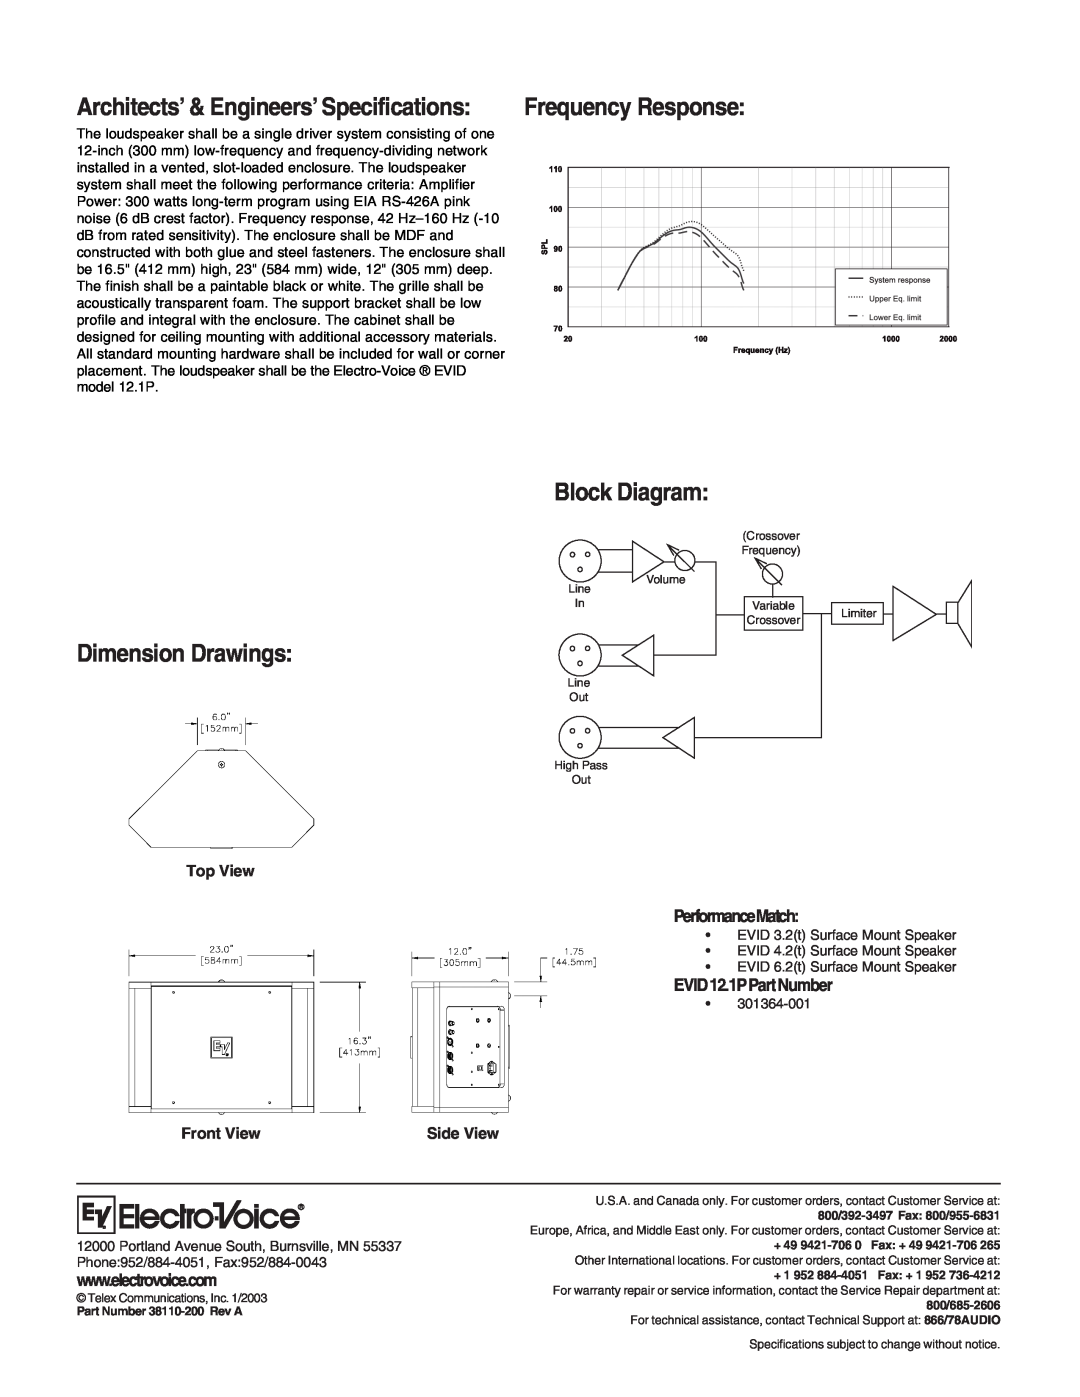 Electro-Voice EVID 12.1P Block Diagram, Dimension Drawings, Frequency Response, PerformanceMatch, EVID12.1PPartNumber 